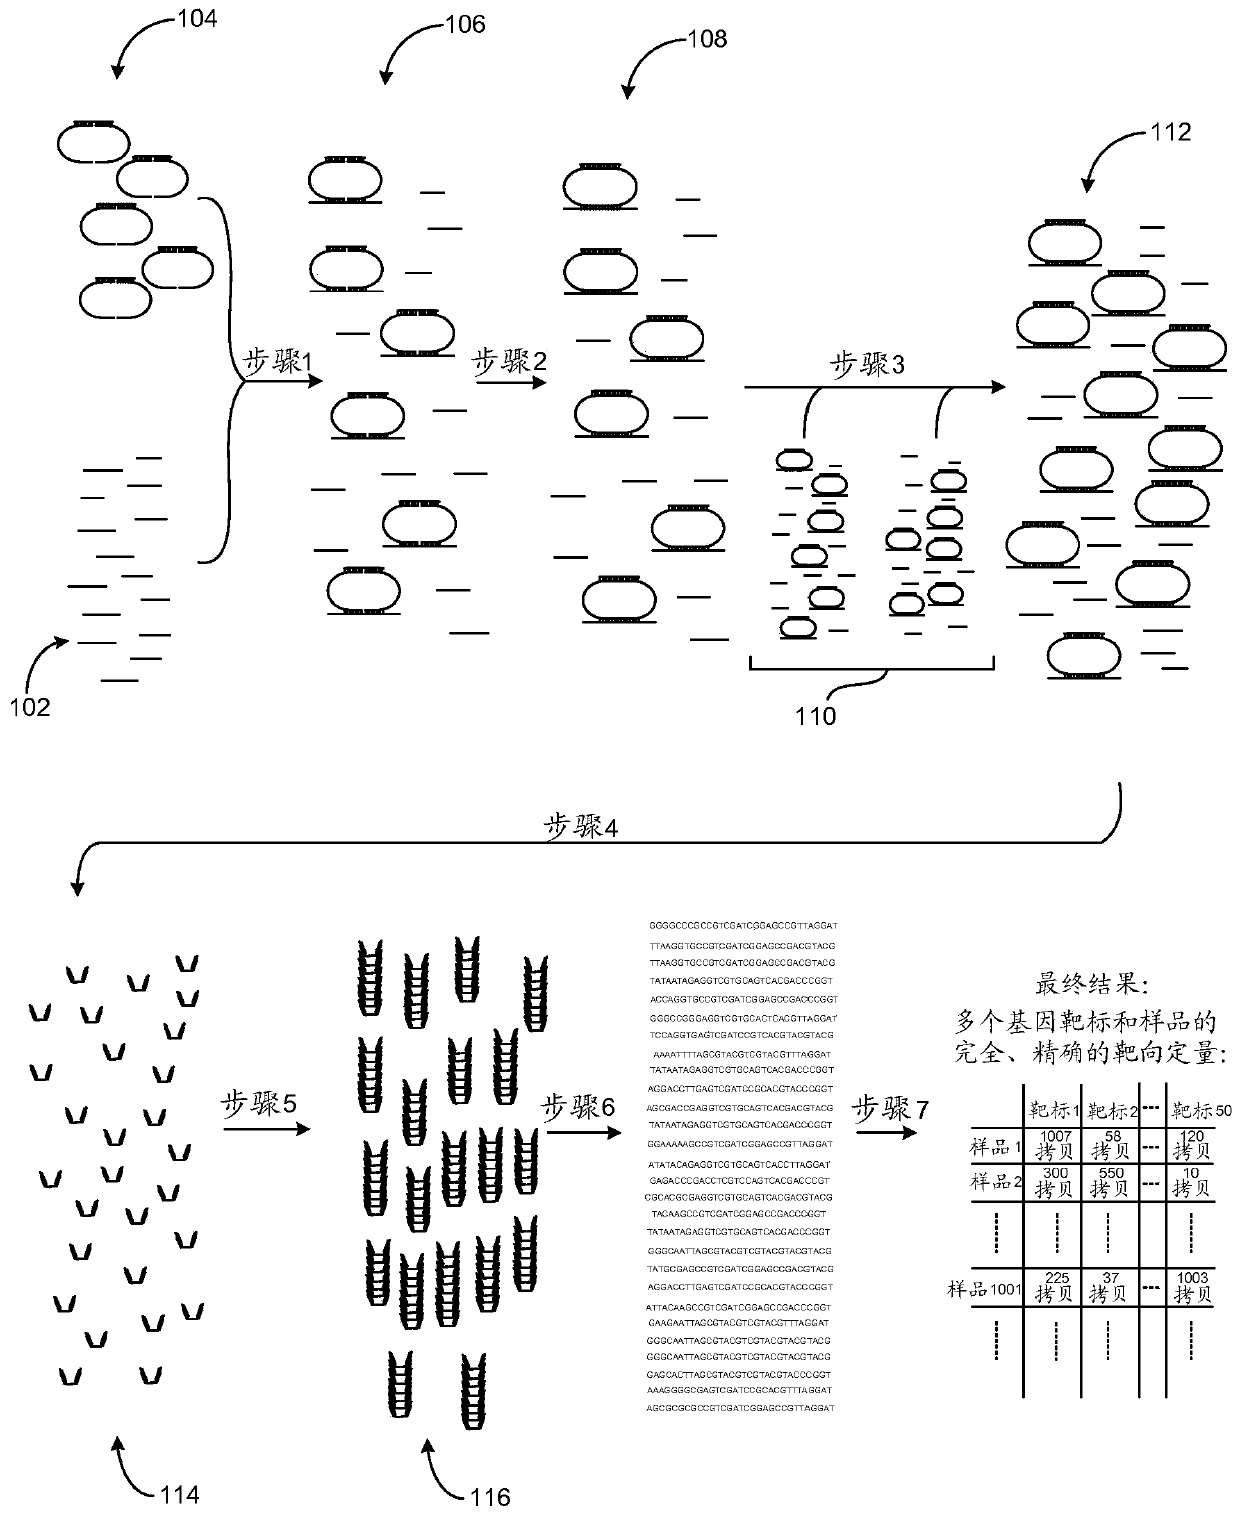 Accurate and massively parallel quantification of nucleic acid